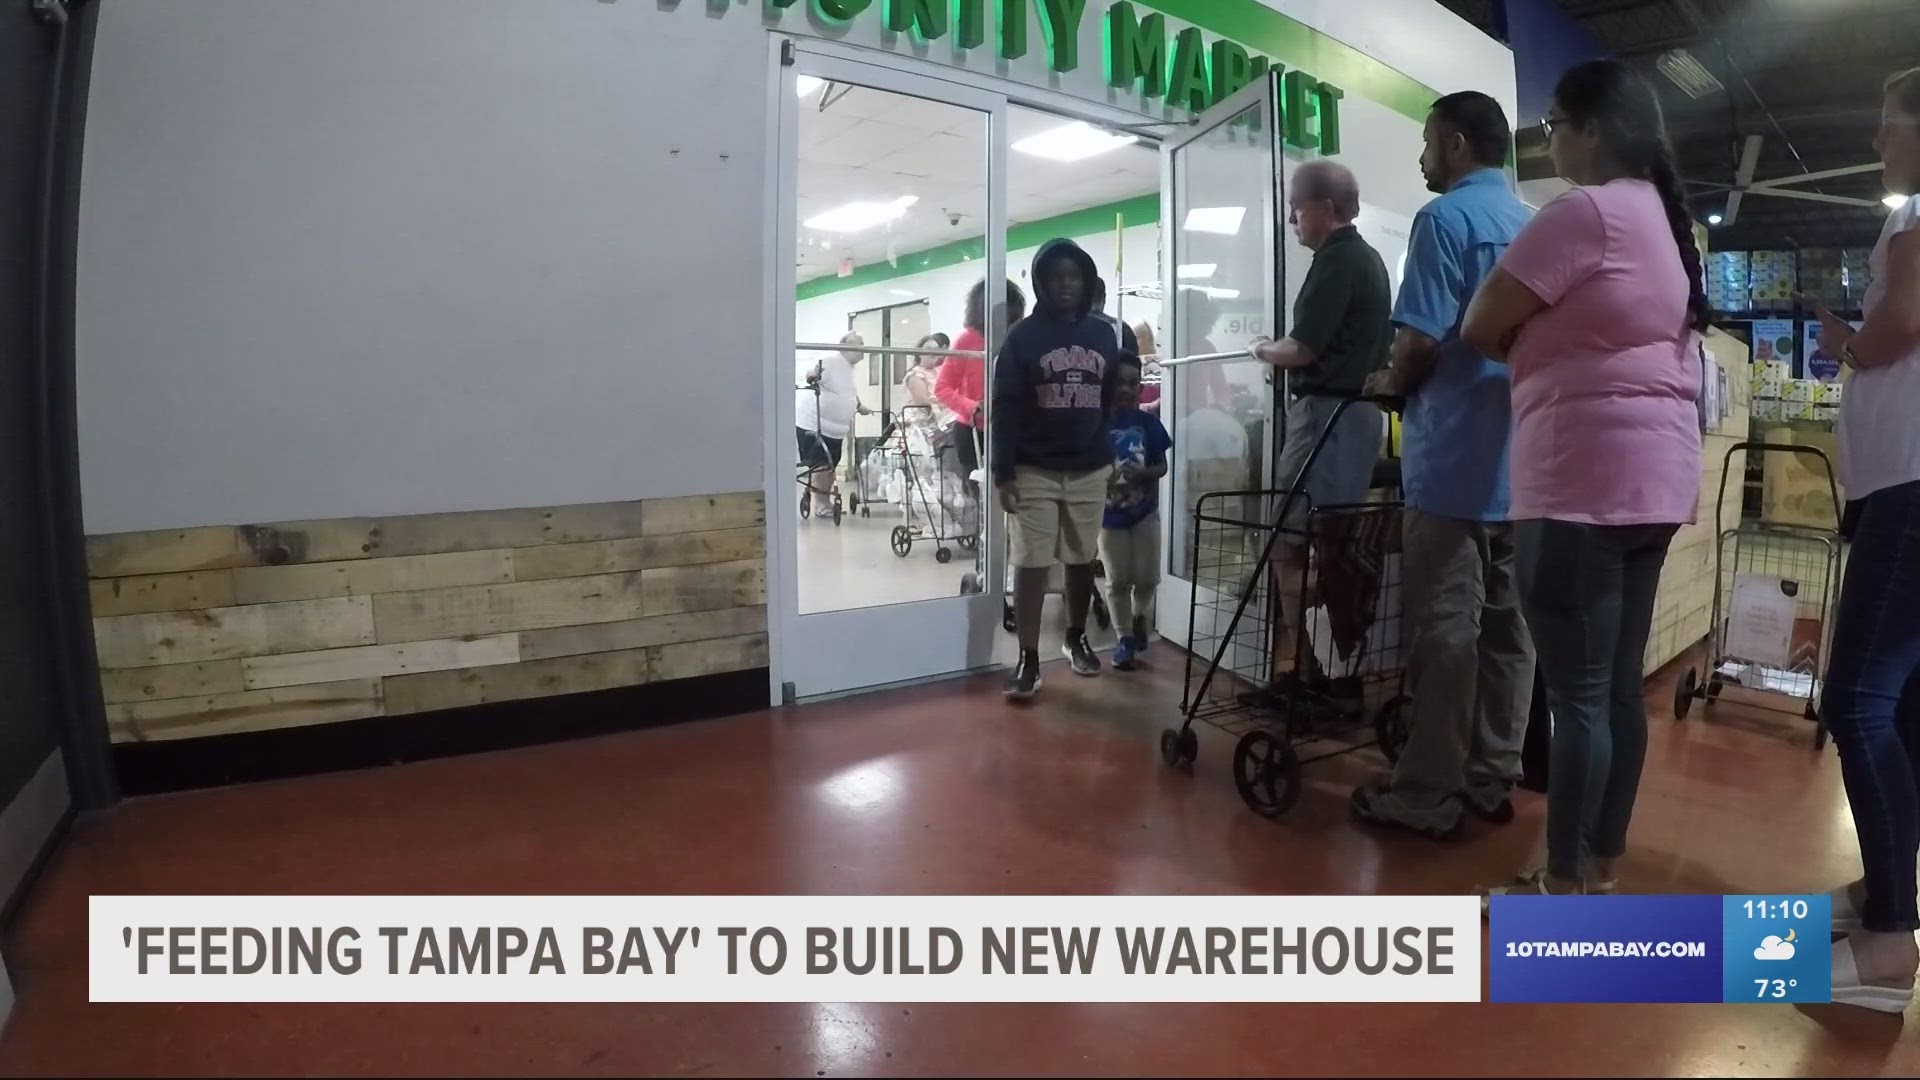 Feeding Tampa Bay expects to provide 90 million meals to people in need this year. However, its CEO estimates demand for meals is closer to 150 million.